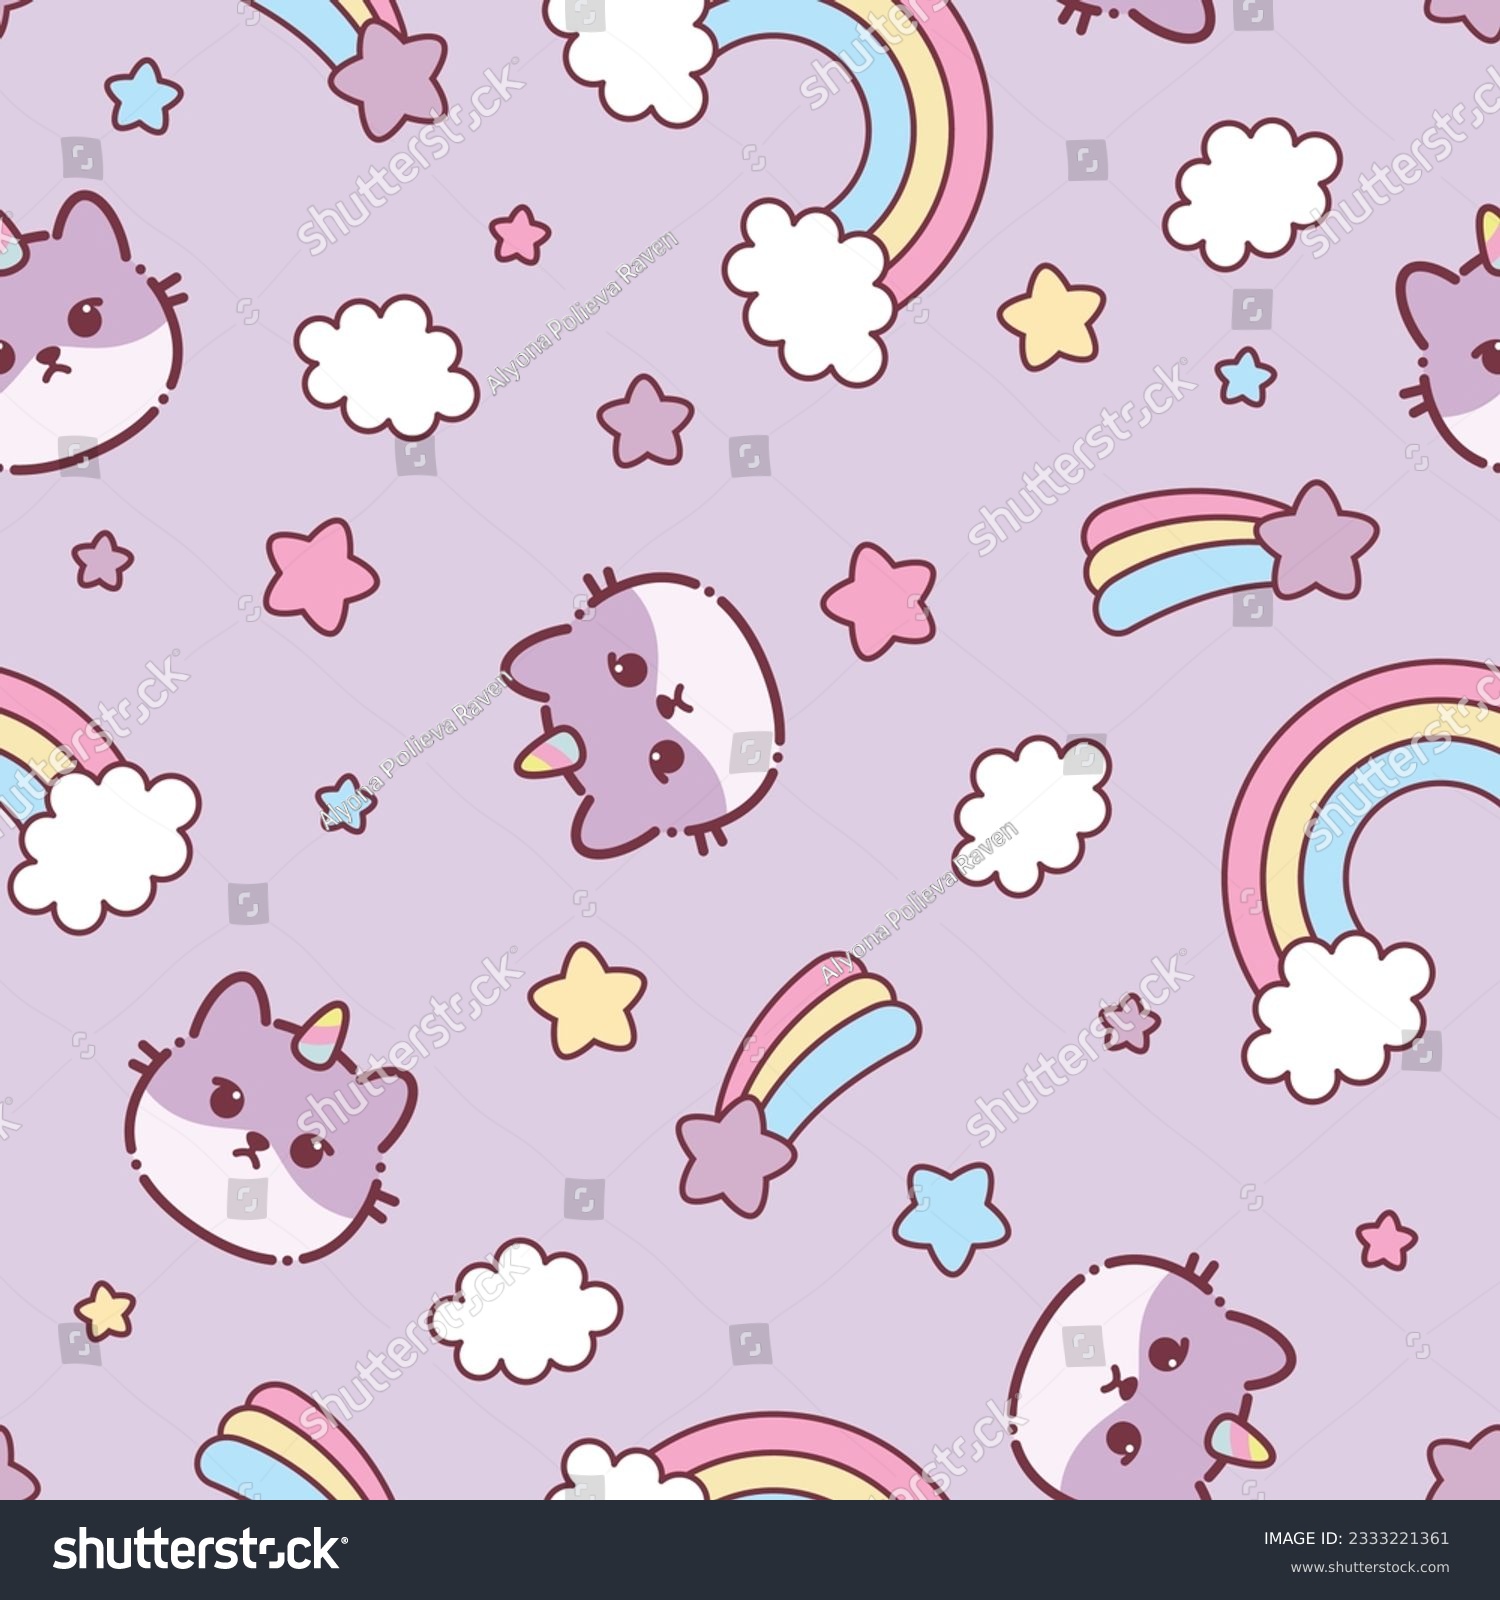 SVG of Cute Cat Caticorn or Kitten Unicorn vector seamless pattern. Kawaii Cat Unicorn. Isolated vector illustration for kids design prints, posters, t-shirts, stickers svg